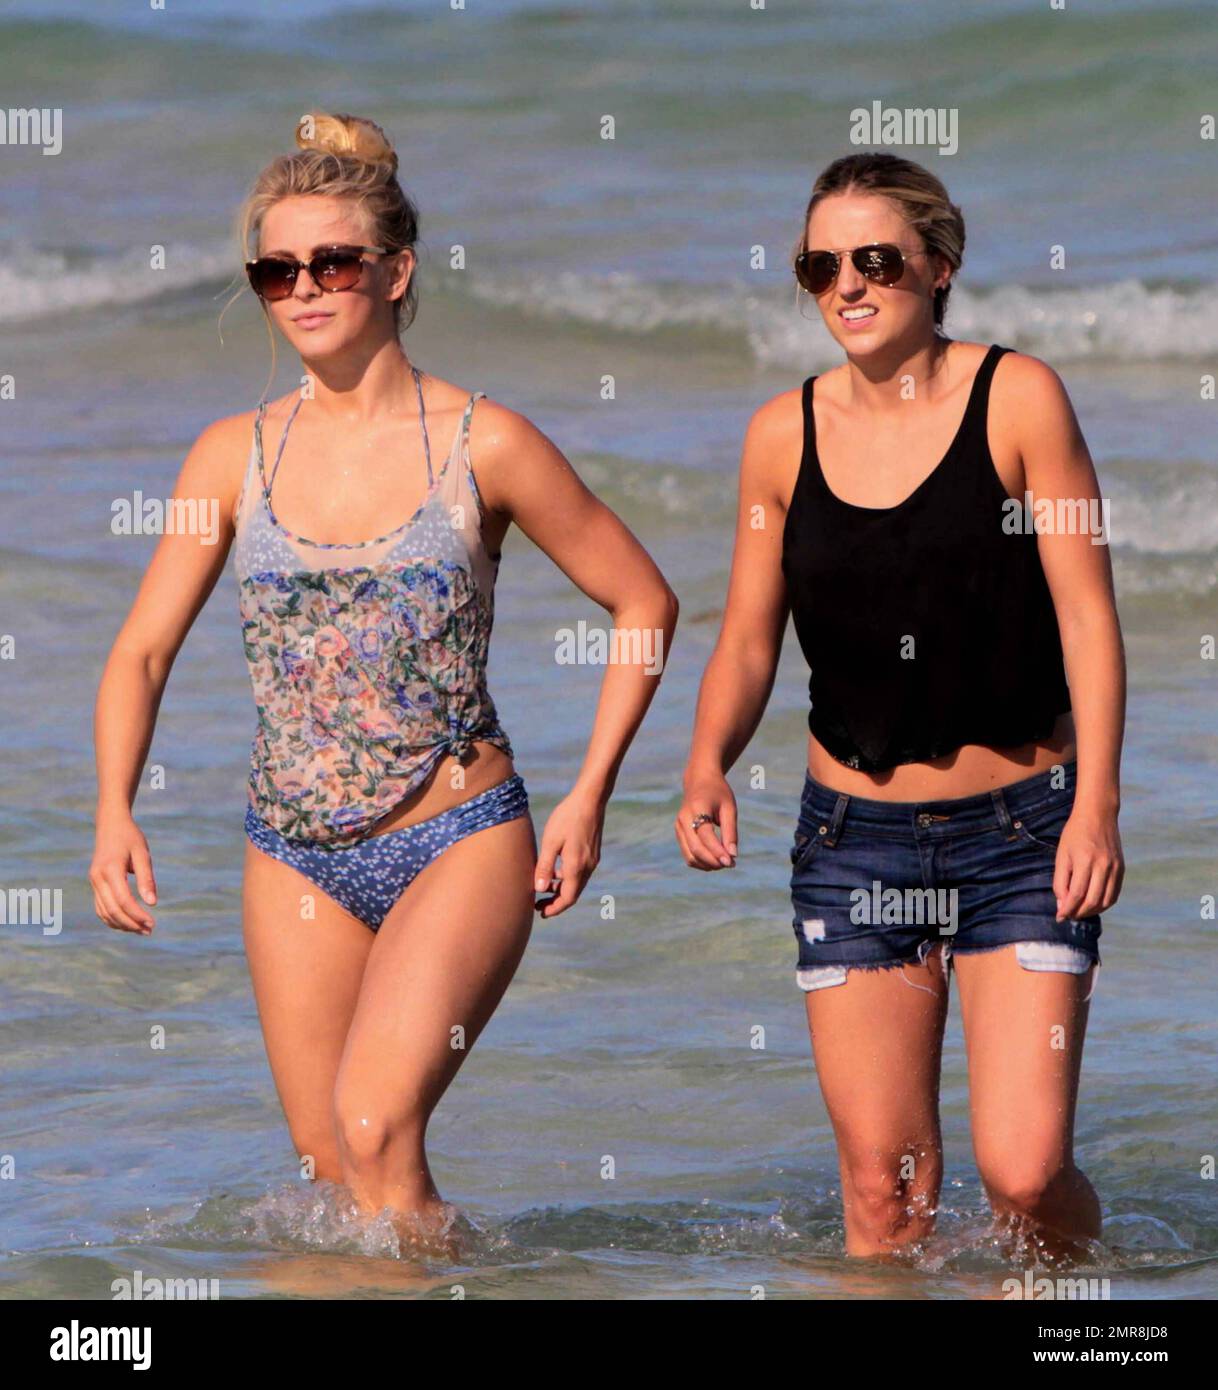 Julianne Hough, spends an early birthday weekend with her boyfriend Ryan Seacrest, brother Derek Hough, mother Mari Anne and best friend Maude who all flew into Miami to be with the actress who is currently filming Rock Of Ages. Julianne wore a blue bikini to take a dip in the hotel pool and also ventured into the ocean with the group who all appeared to be having a great time. Julianne will turn 23 on Wednesday. Miami Beach, FL. 7/16/11.   . Stock Photo